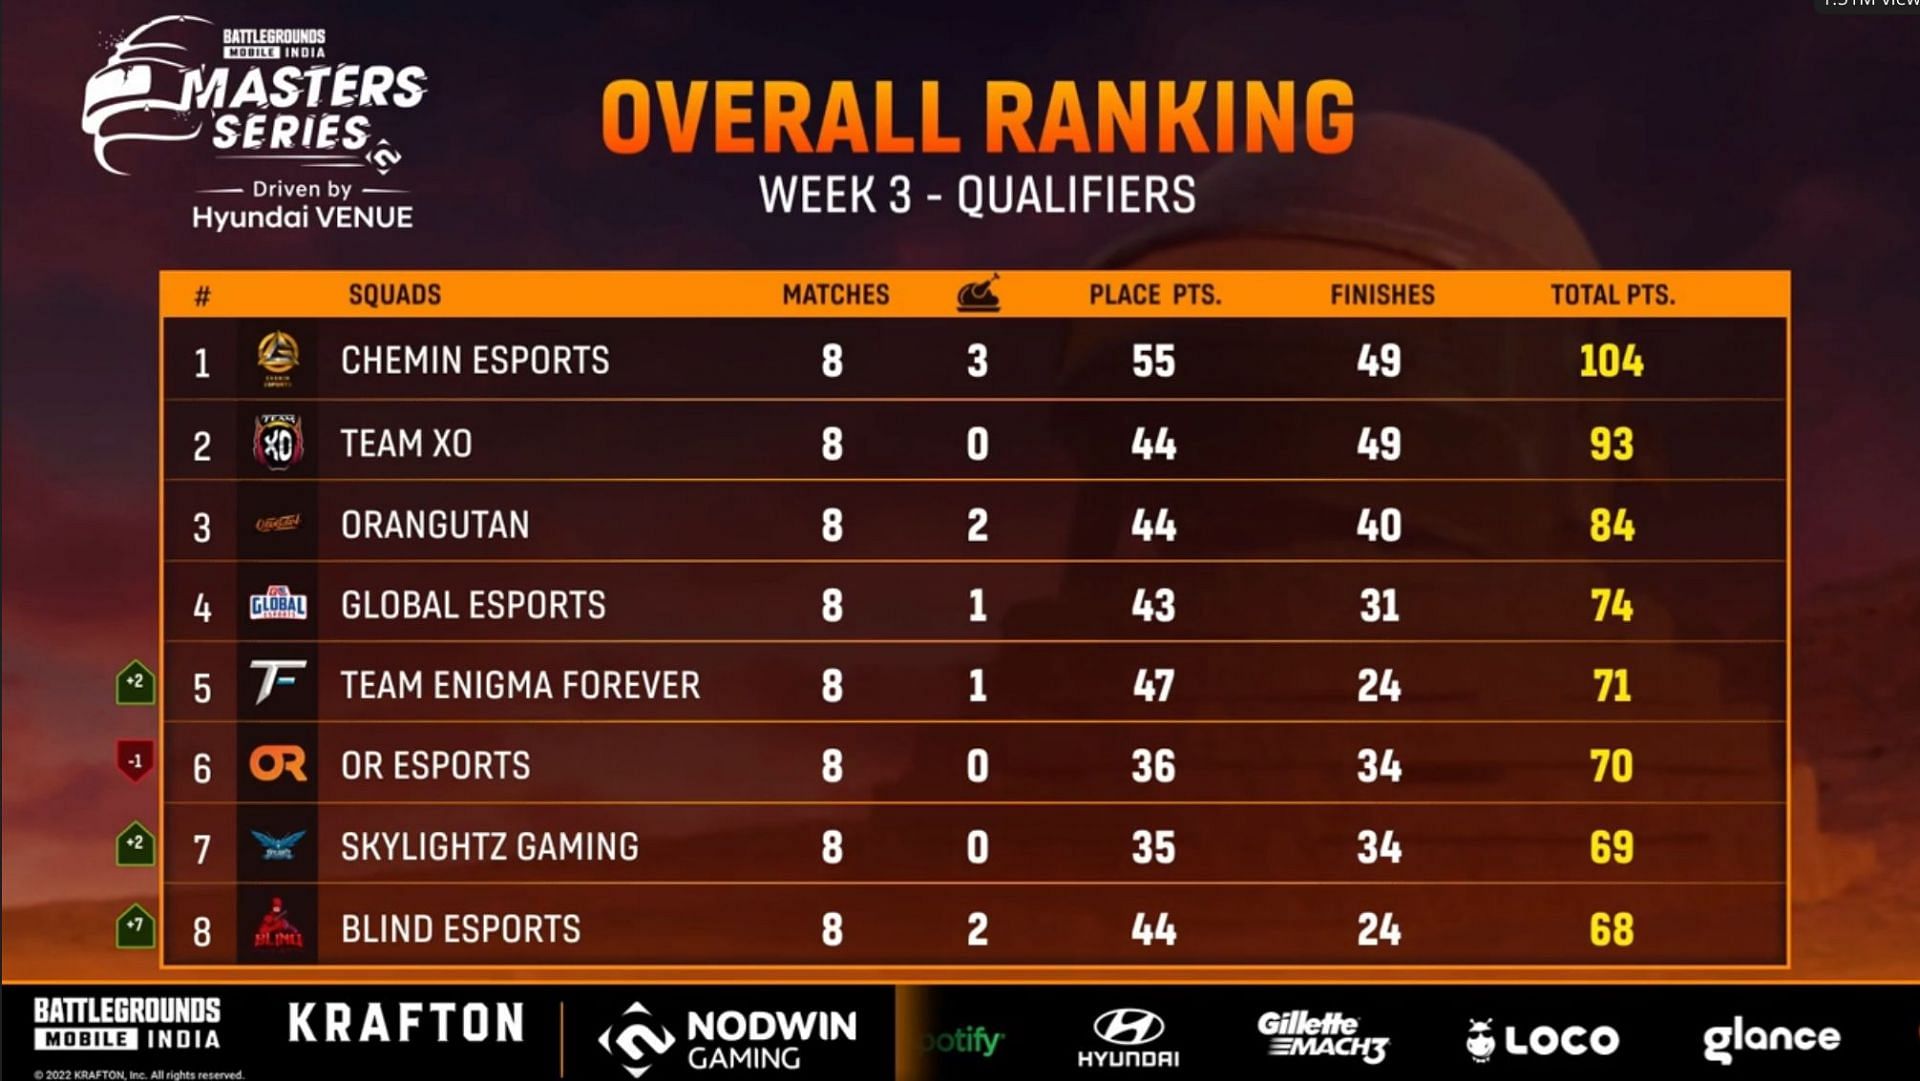 Chemin Esports earned first place in BGMI Masters Series Week 3 Qualifiers (Image via Loco)